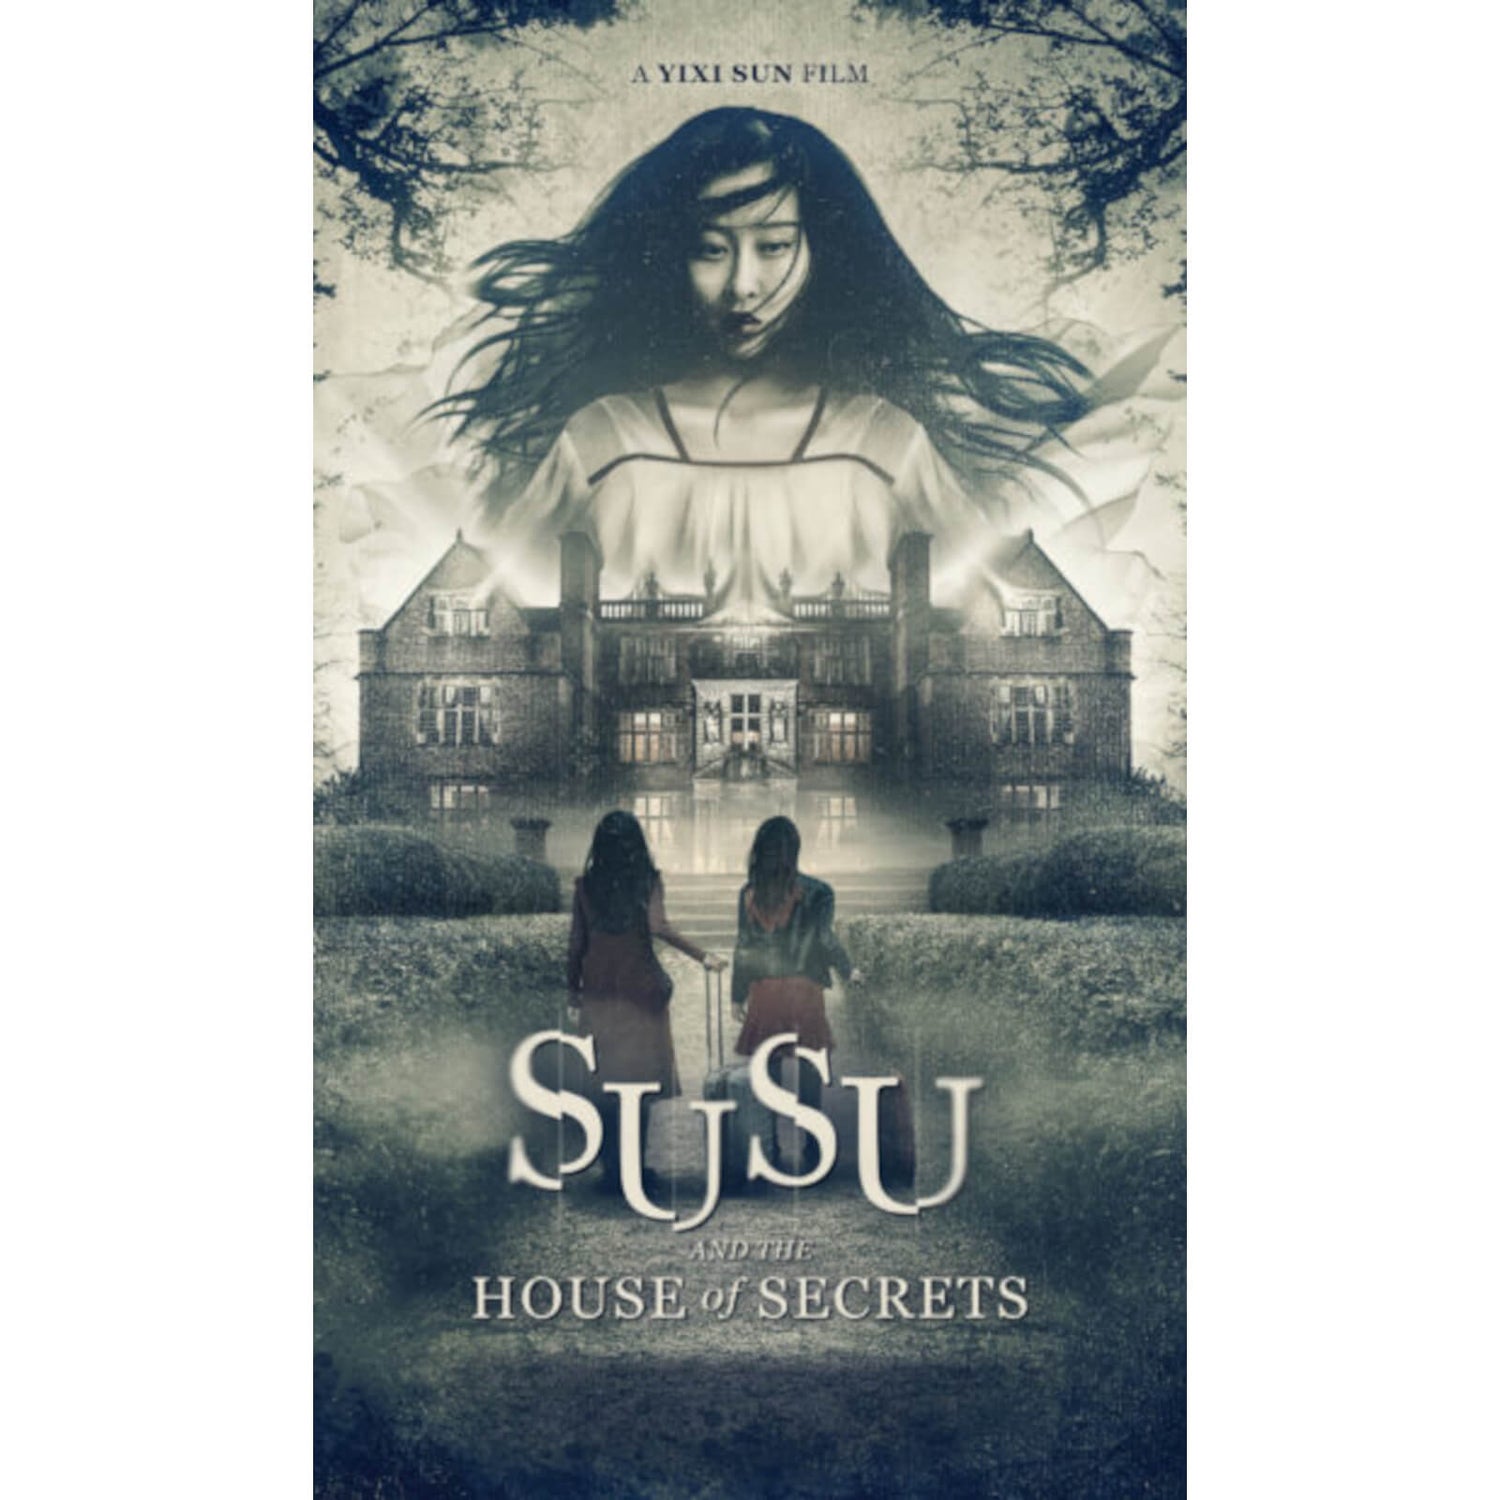 Susu and The House of Secrets